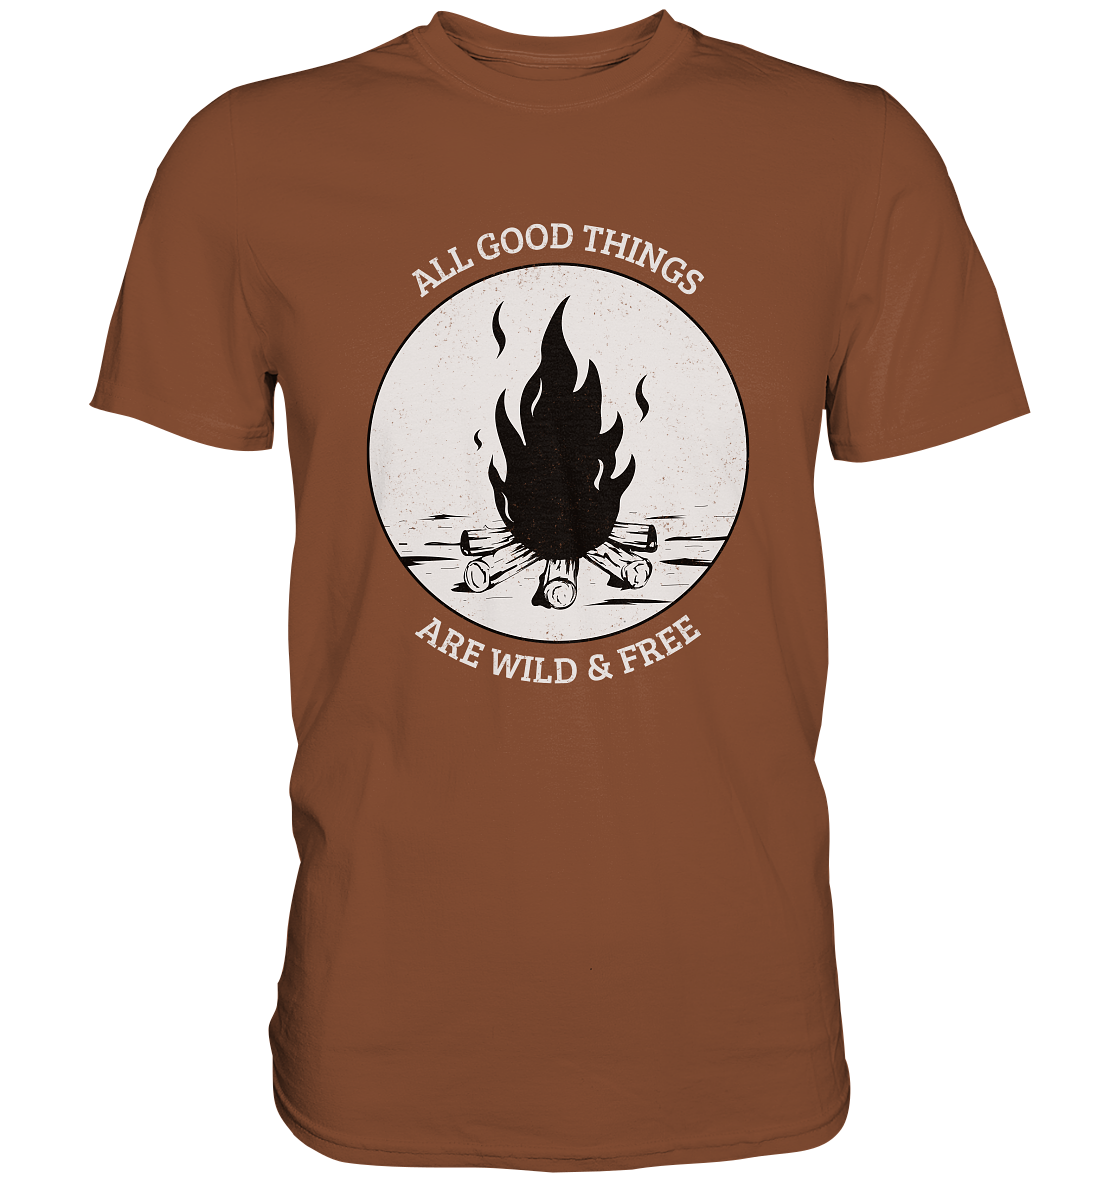 All good things are wild and free. Outddor Camping Zelten - Premium Shirt